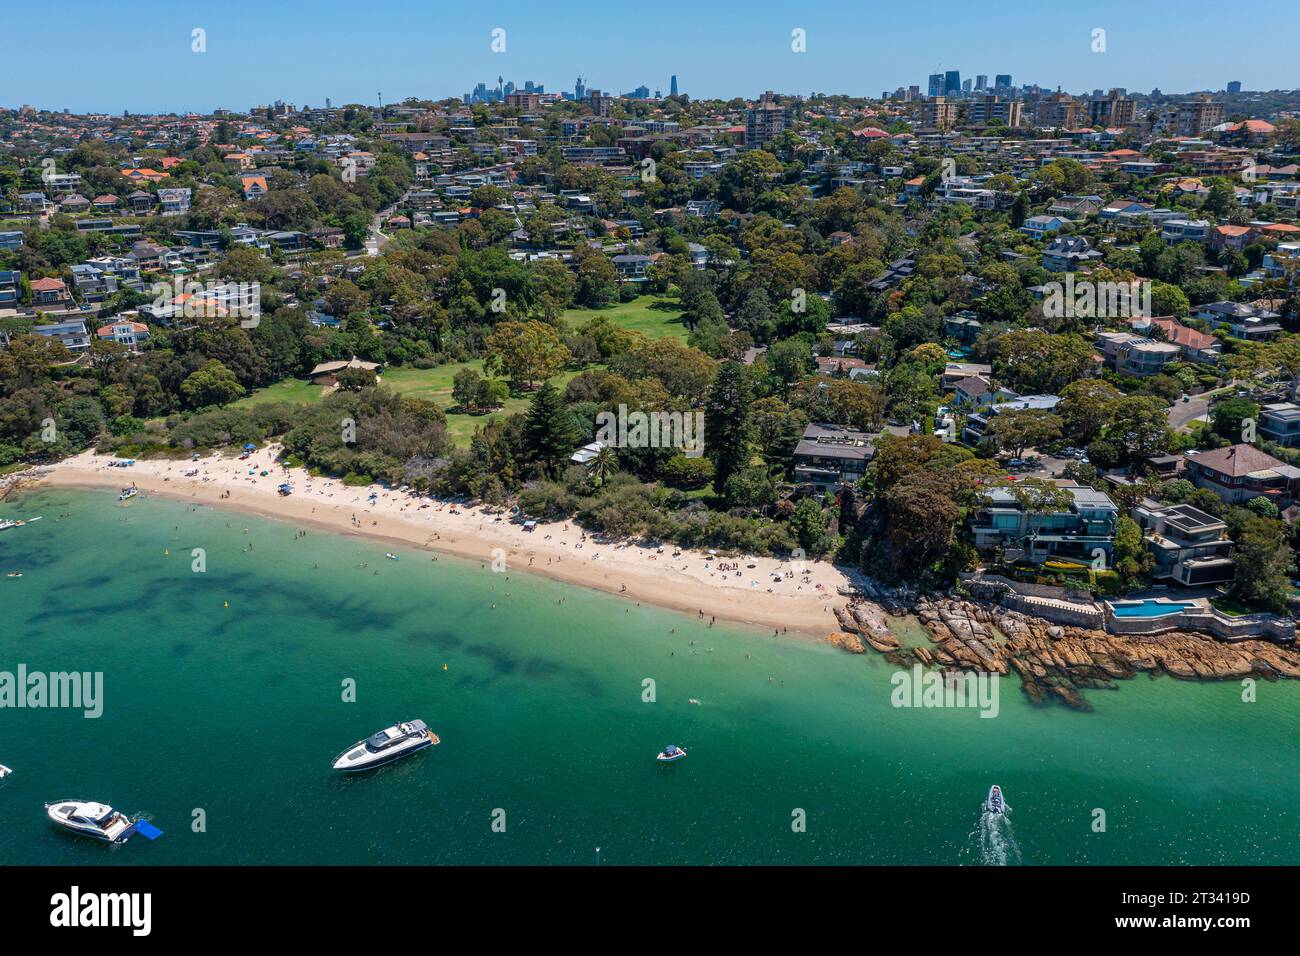 Panoramic drone aerial view over Cobblers Bay and Chinamans Beach in Mosman, Northern Beaches area of Sydney, Australia. Stock Photo